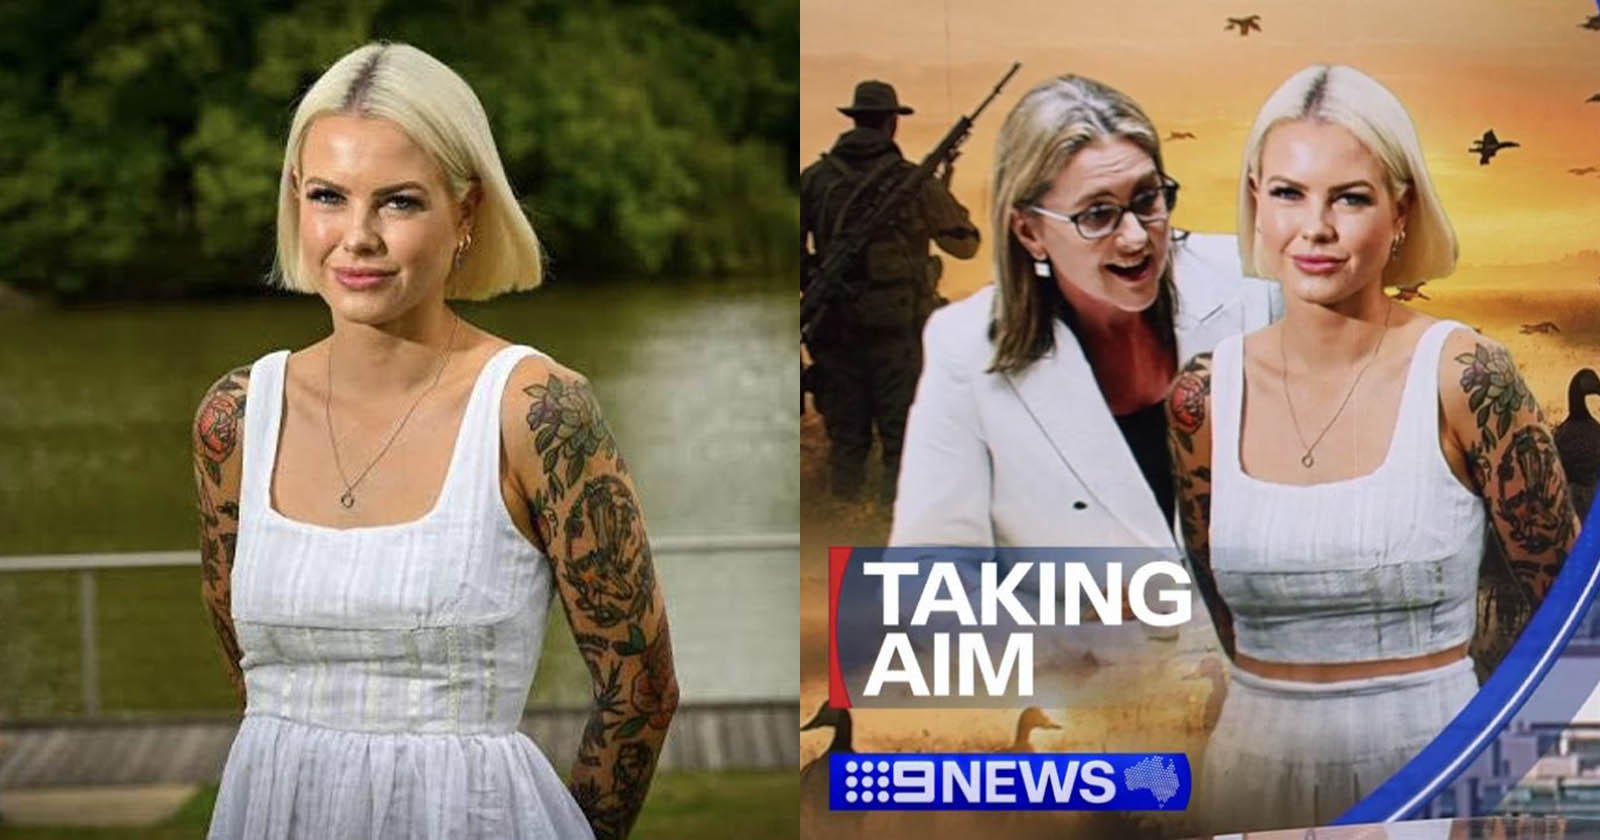 News Station Blames Photoshop for Sexist Edit of Female Politician